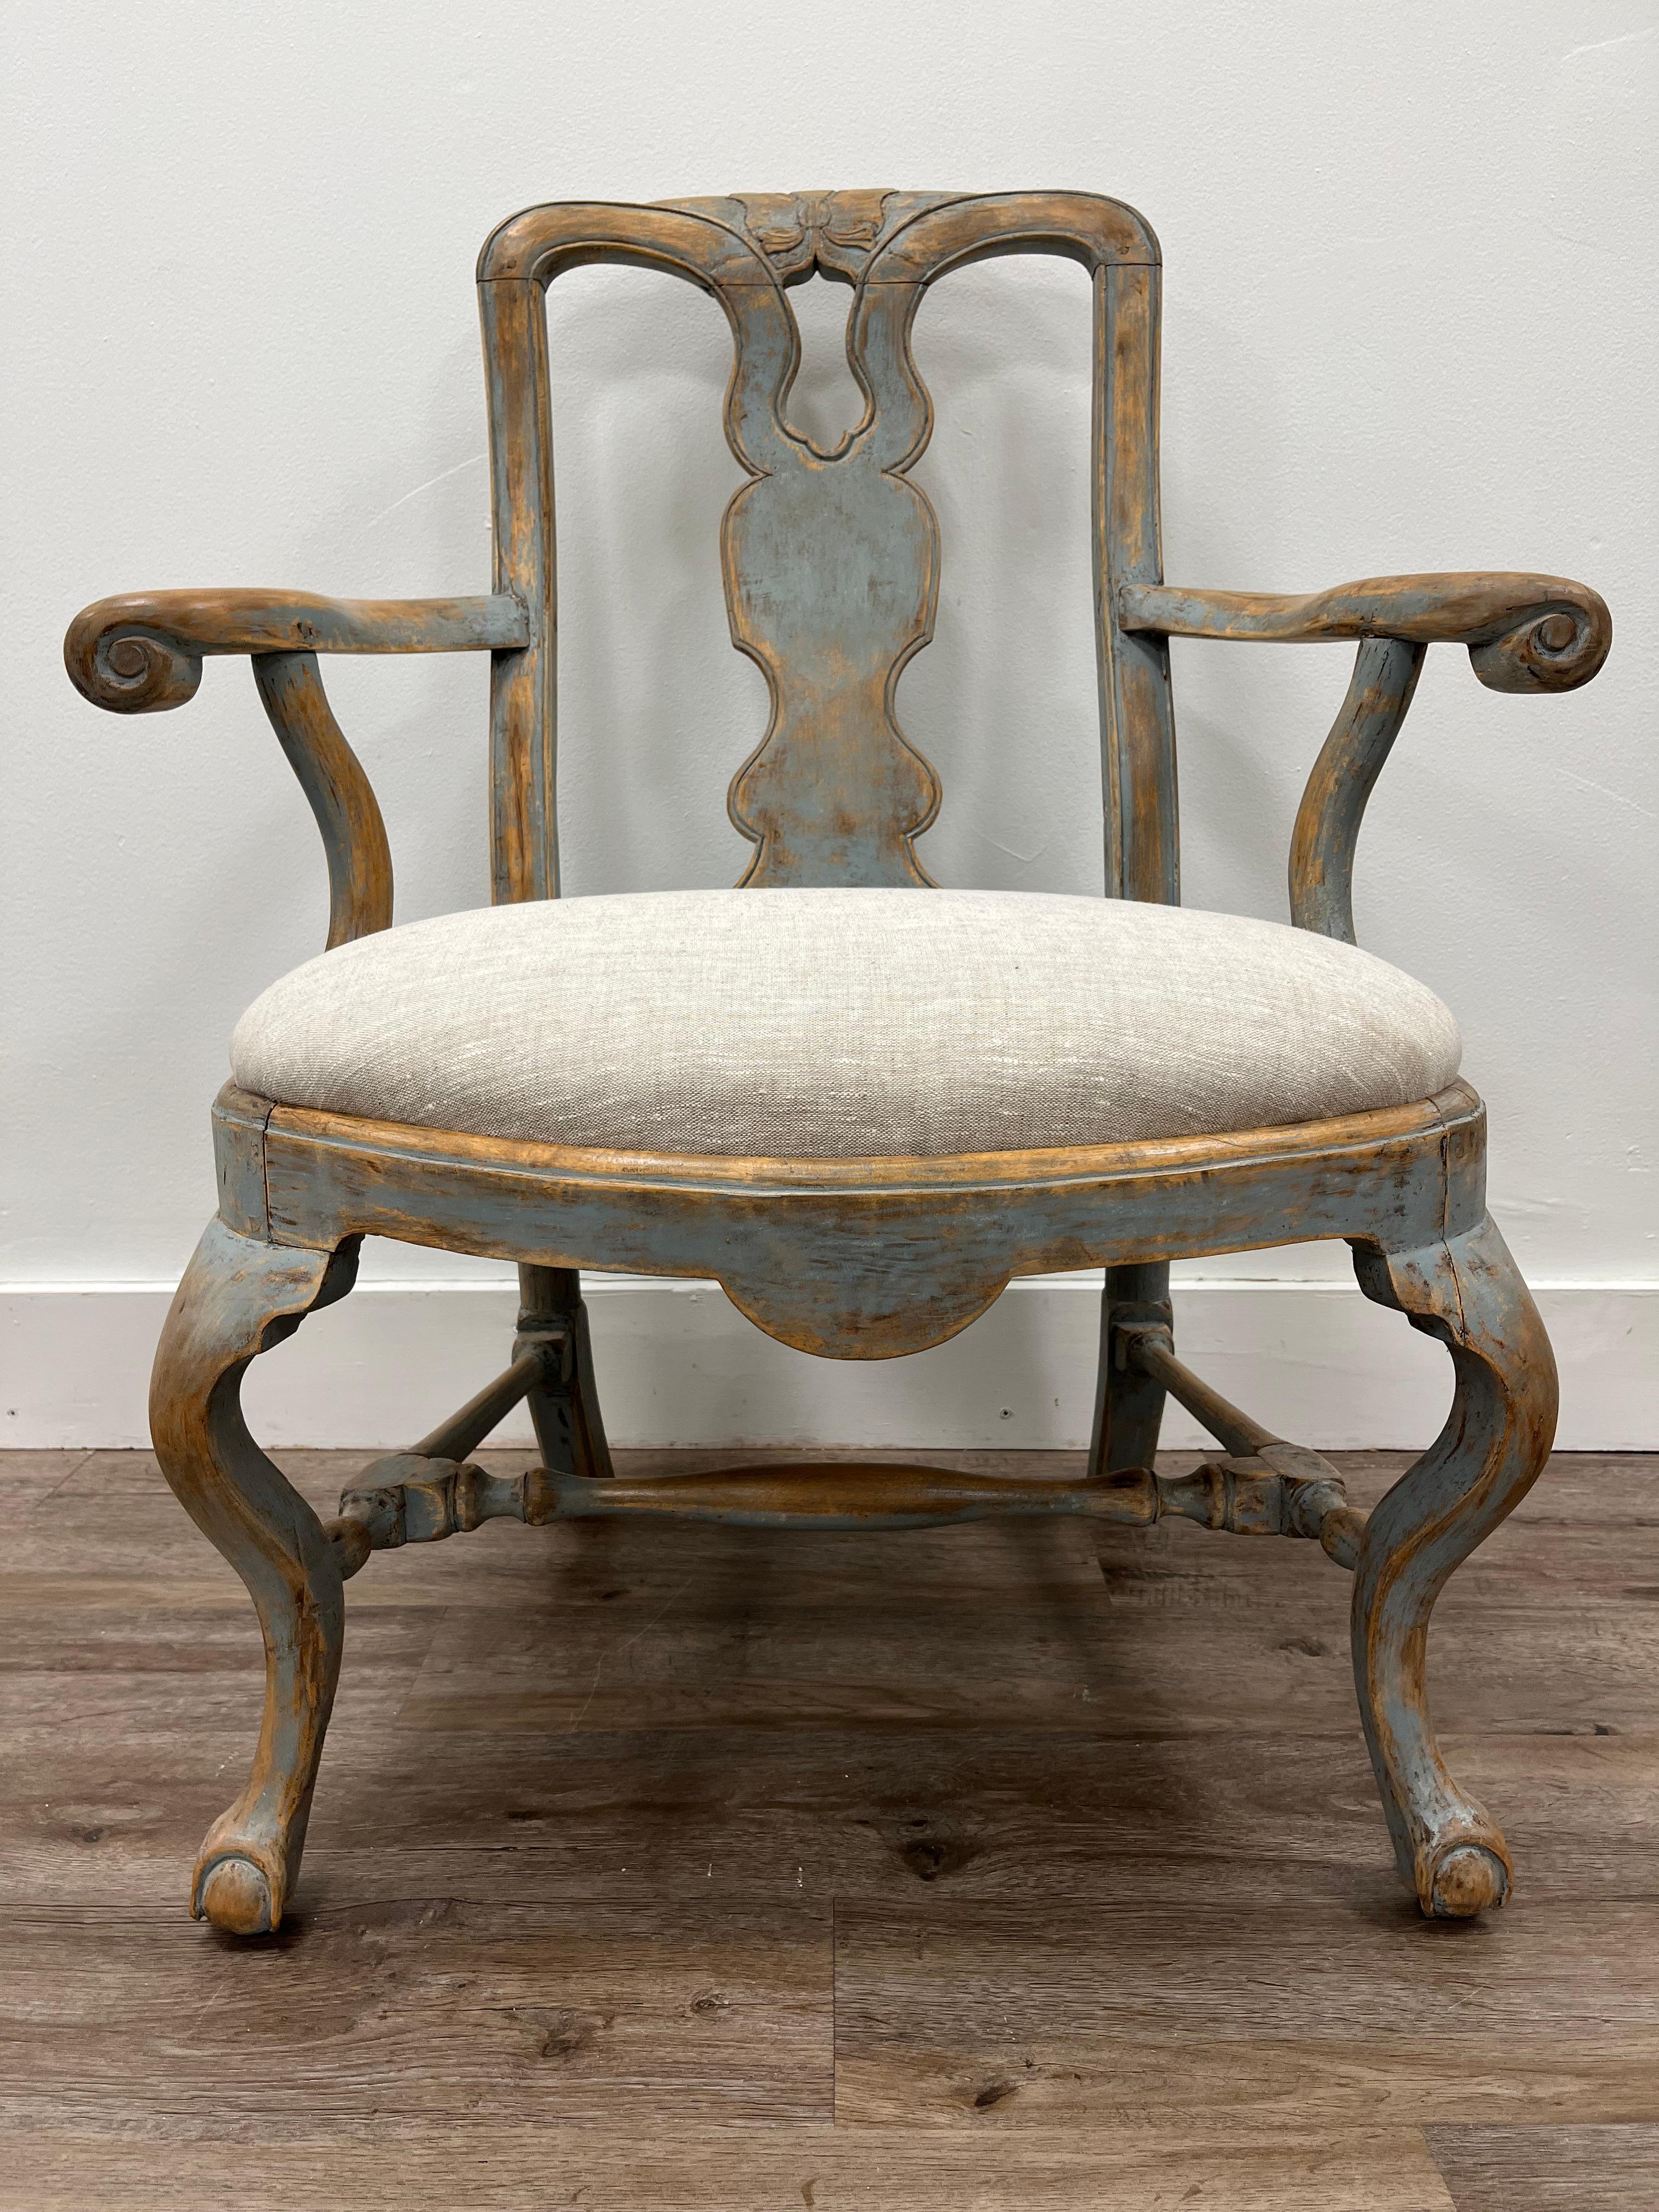 A fine Swedish Rococo armchair with carved backrest and turned arm rests. Wide seat atop cabriolet legs with turned H-cross construction. Tastefully repainted in pale blue and original seat has been reupholstered in linen. 